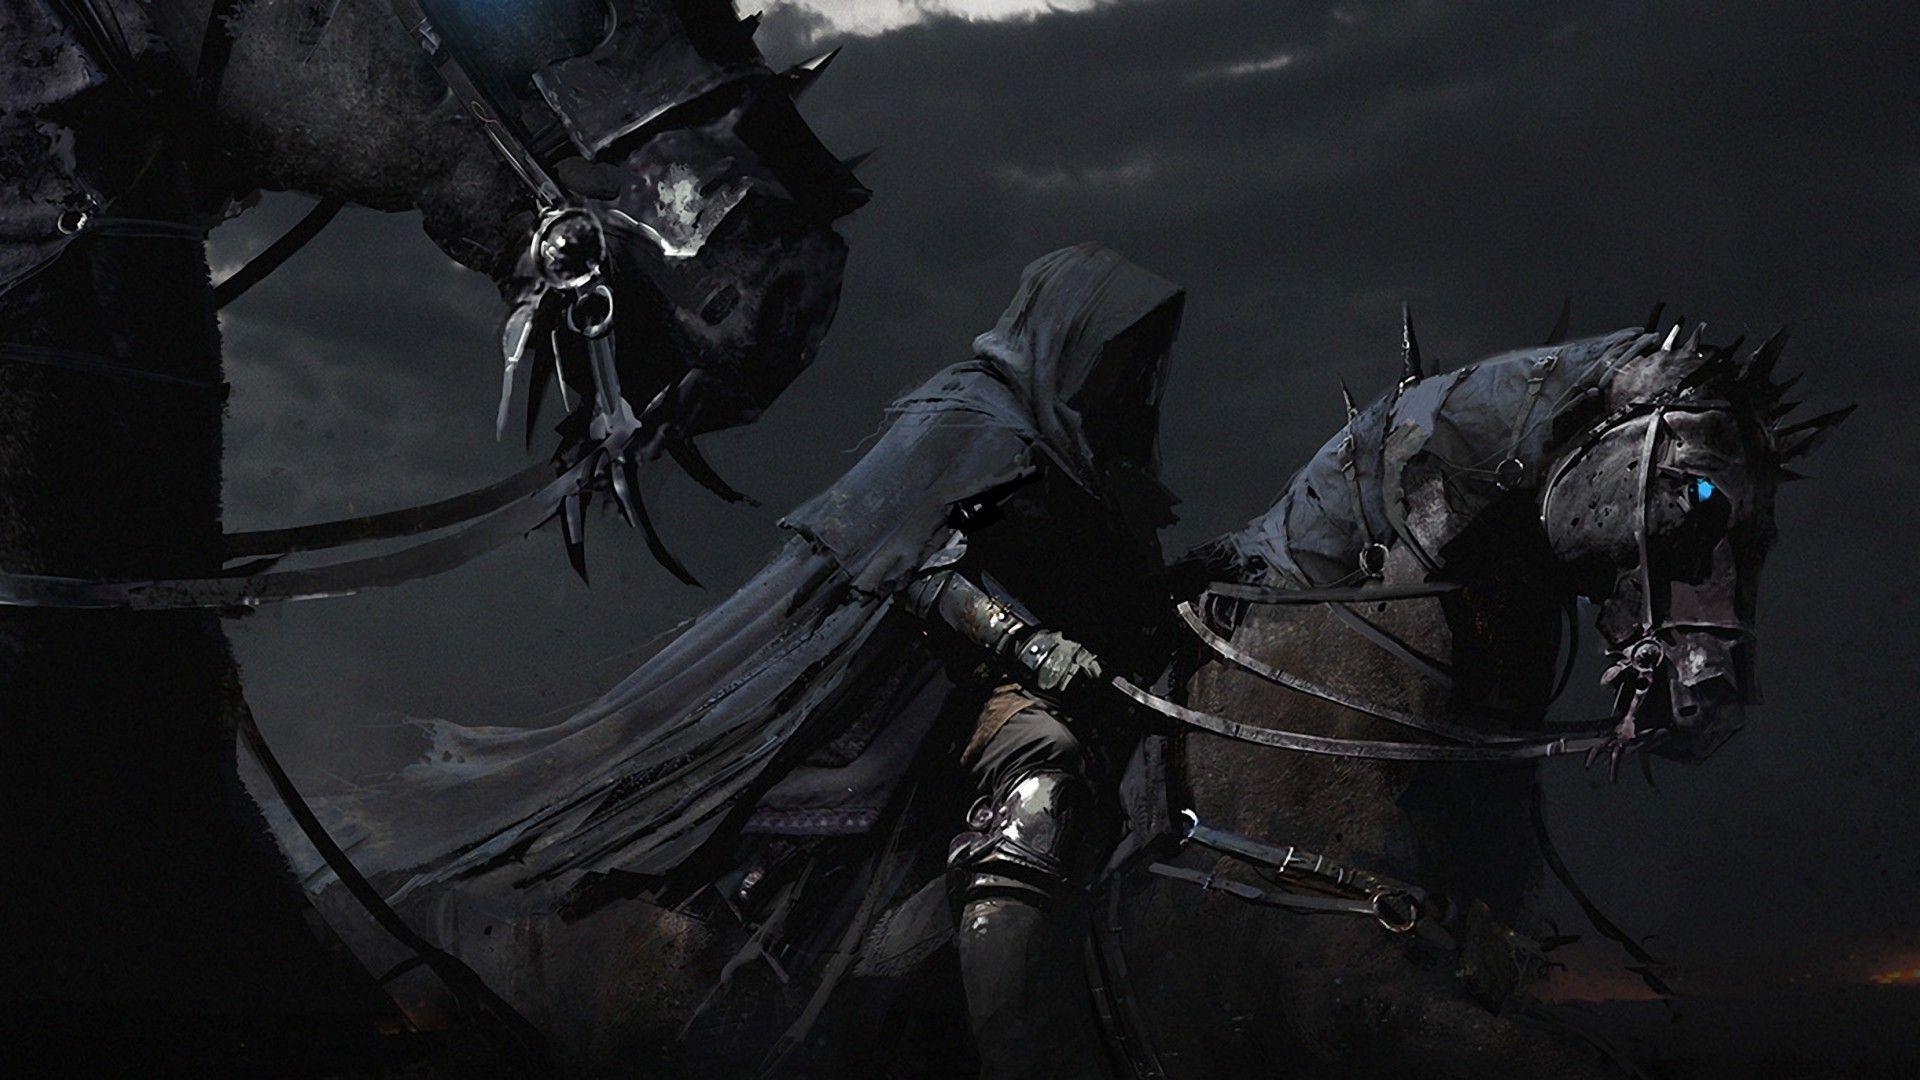 Lord Of The Rings Dark Riders. Nazgul The Lord Of The Rings Movie